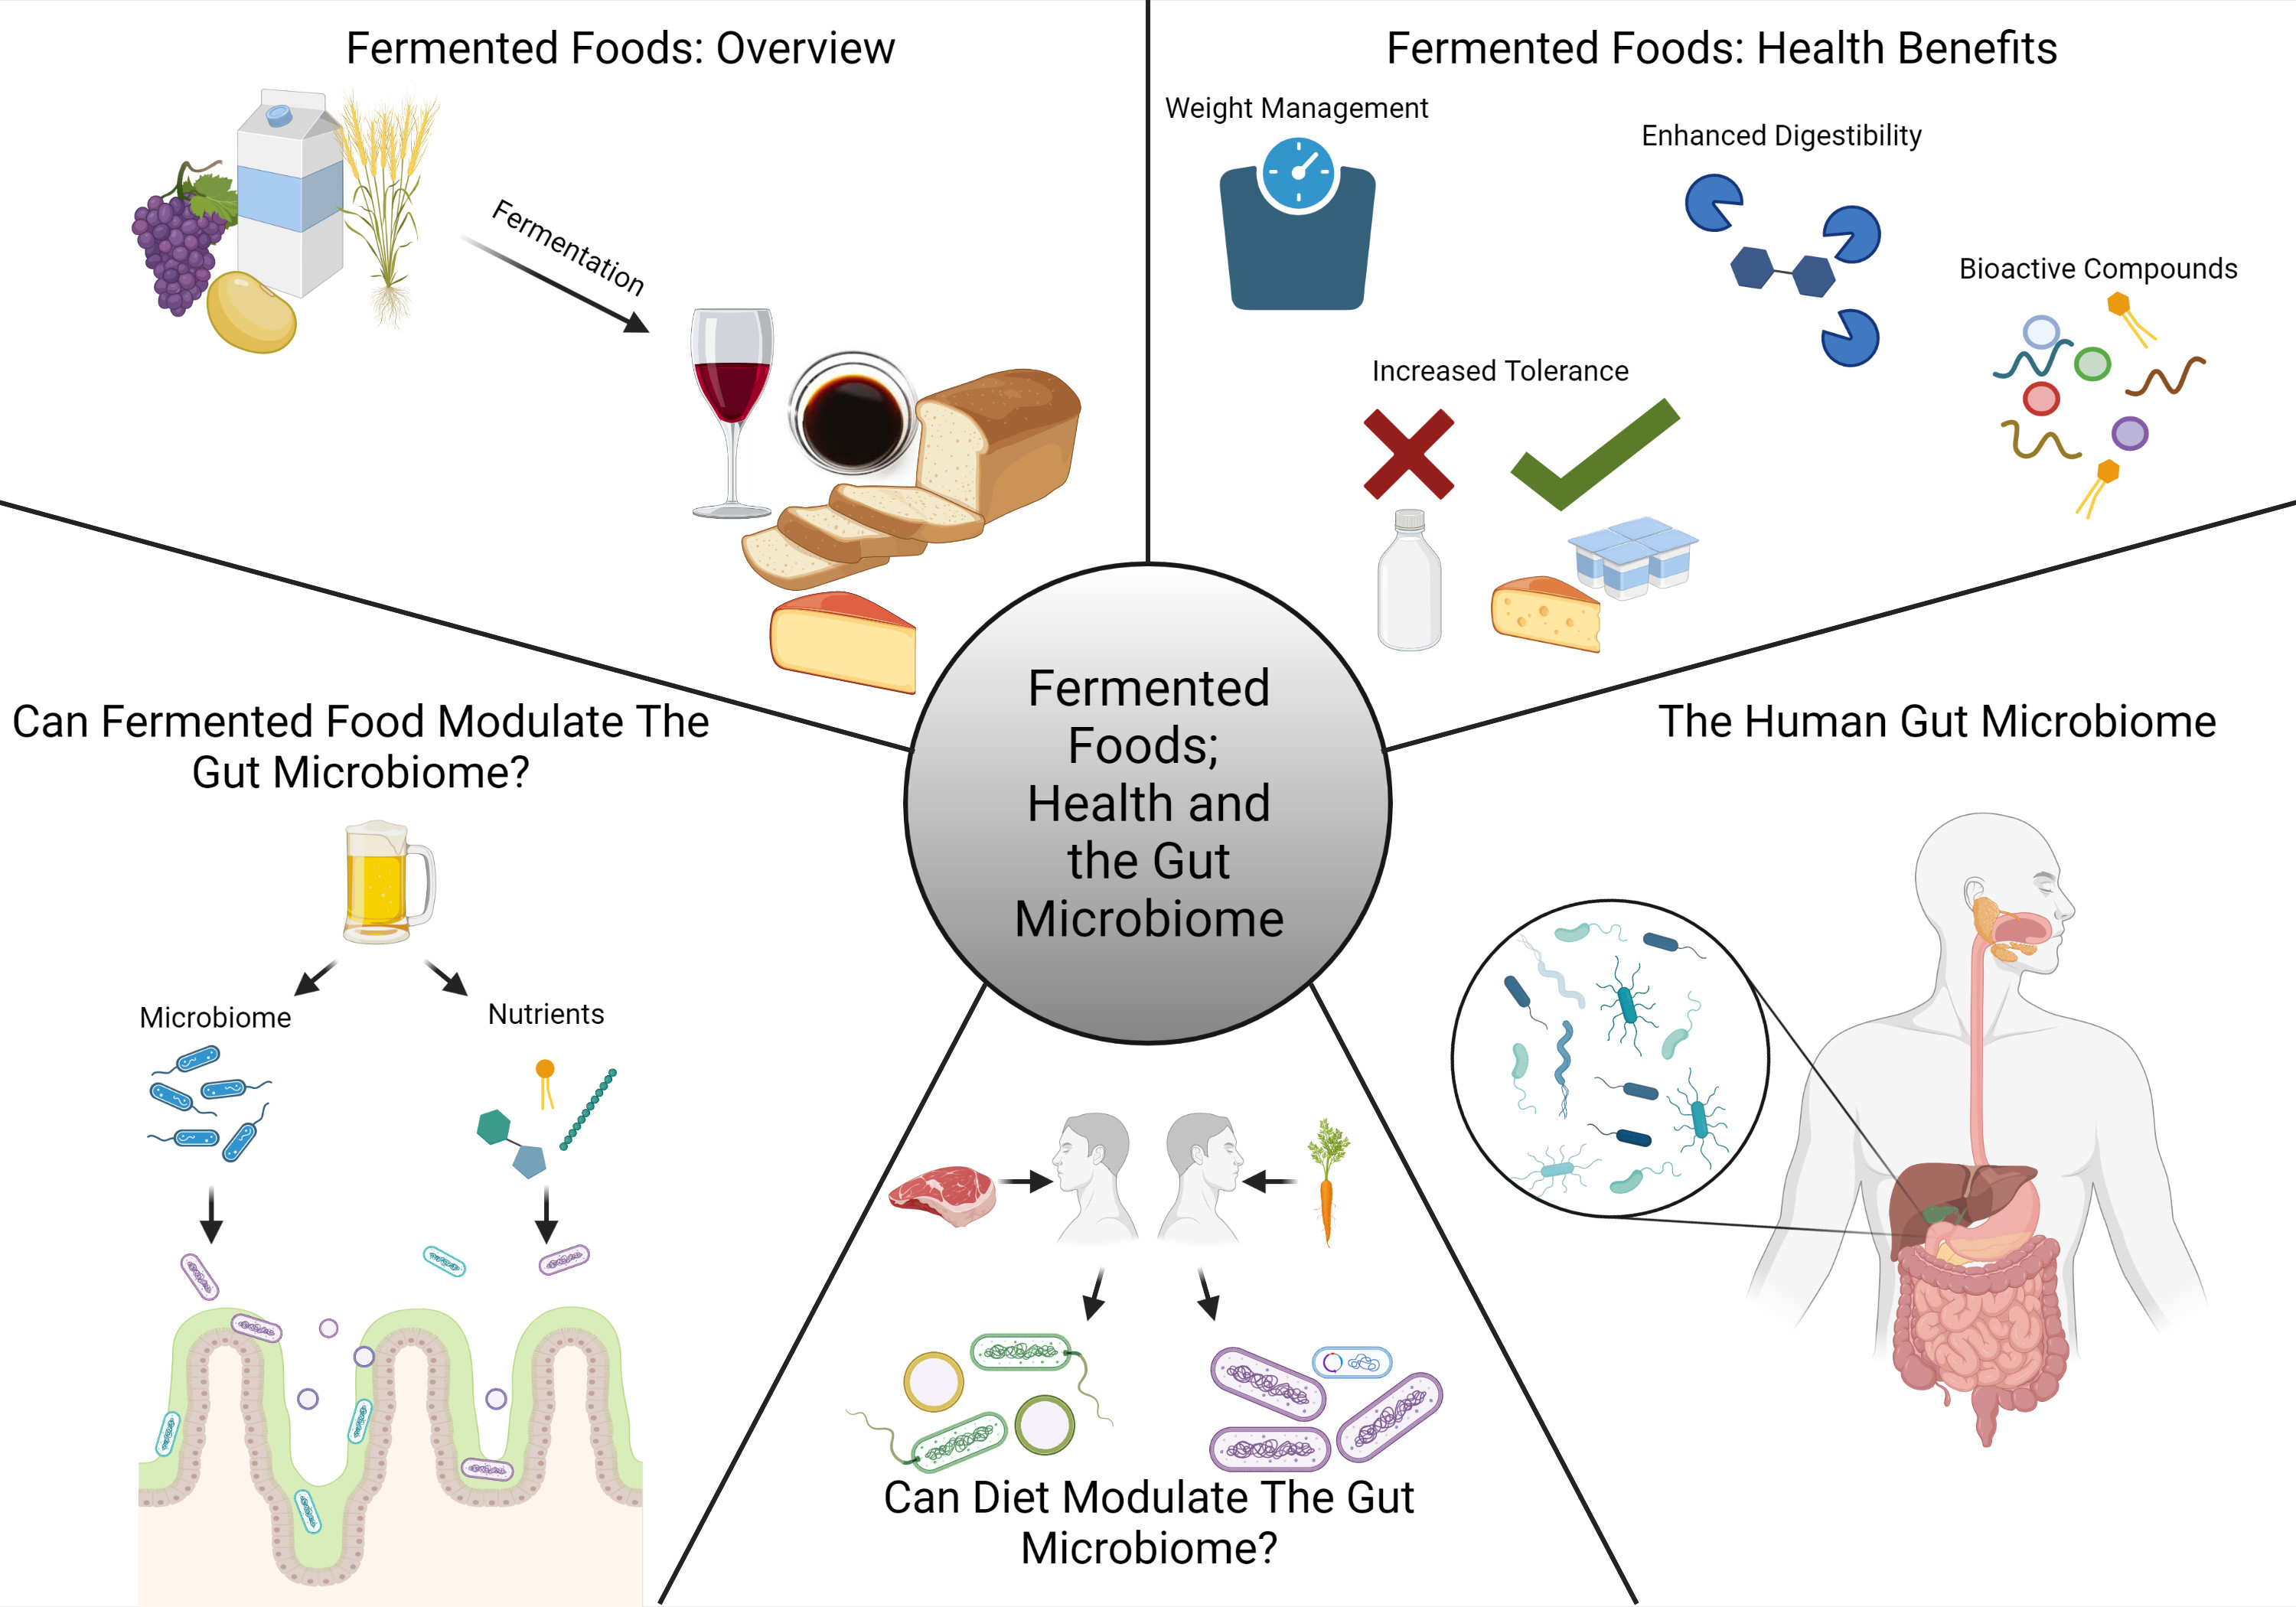 IV. Benefits of Fermented Feed for Gut Health